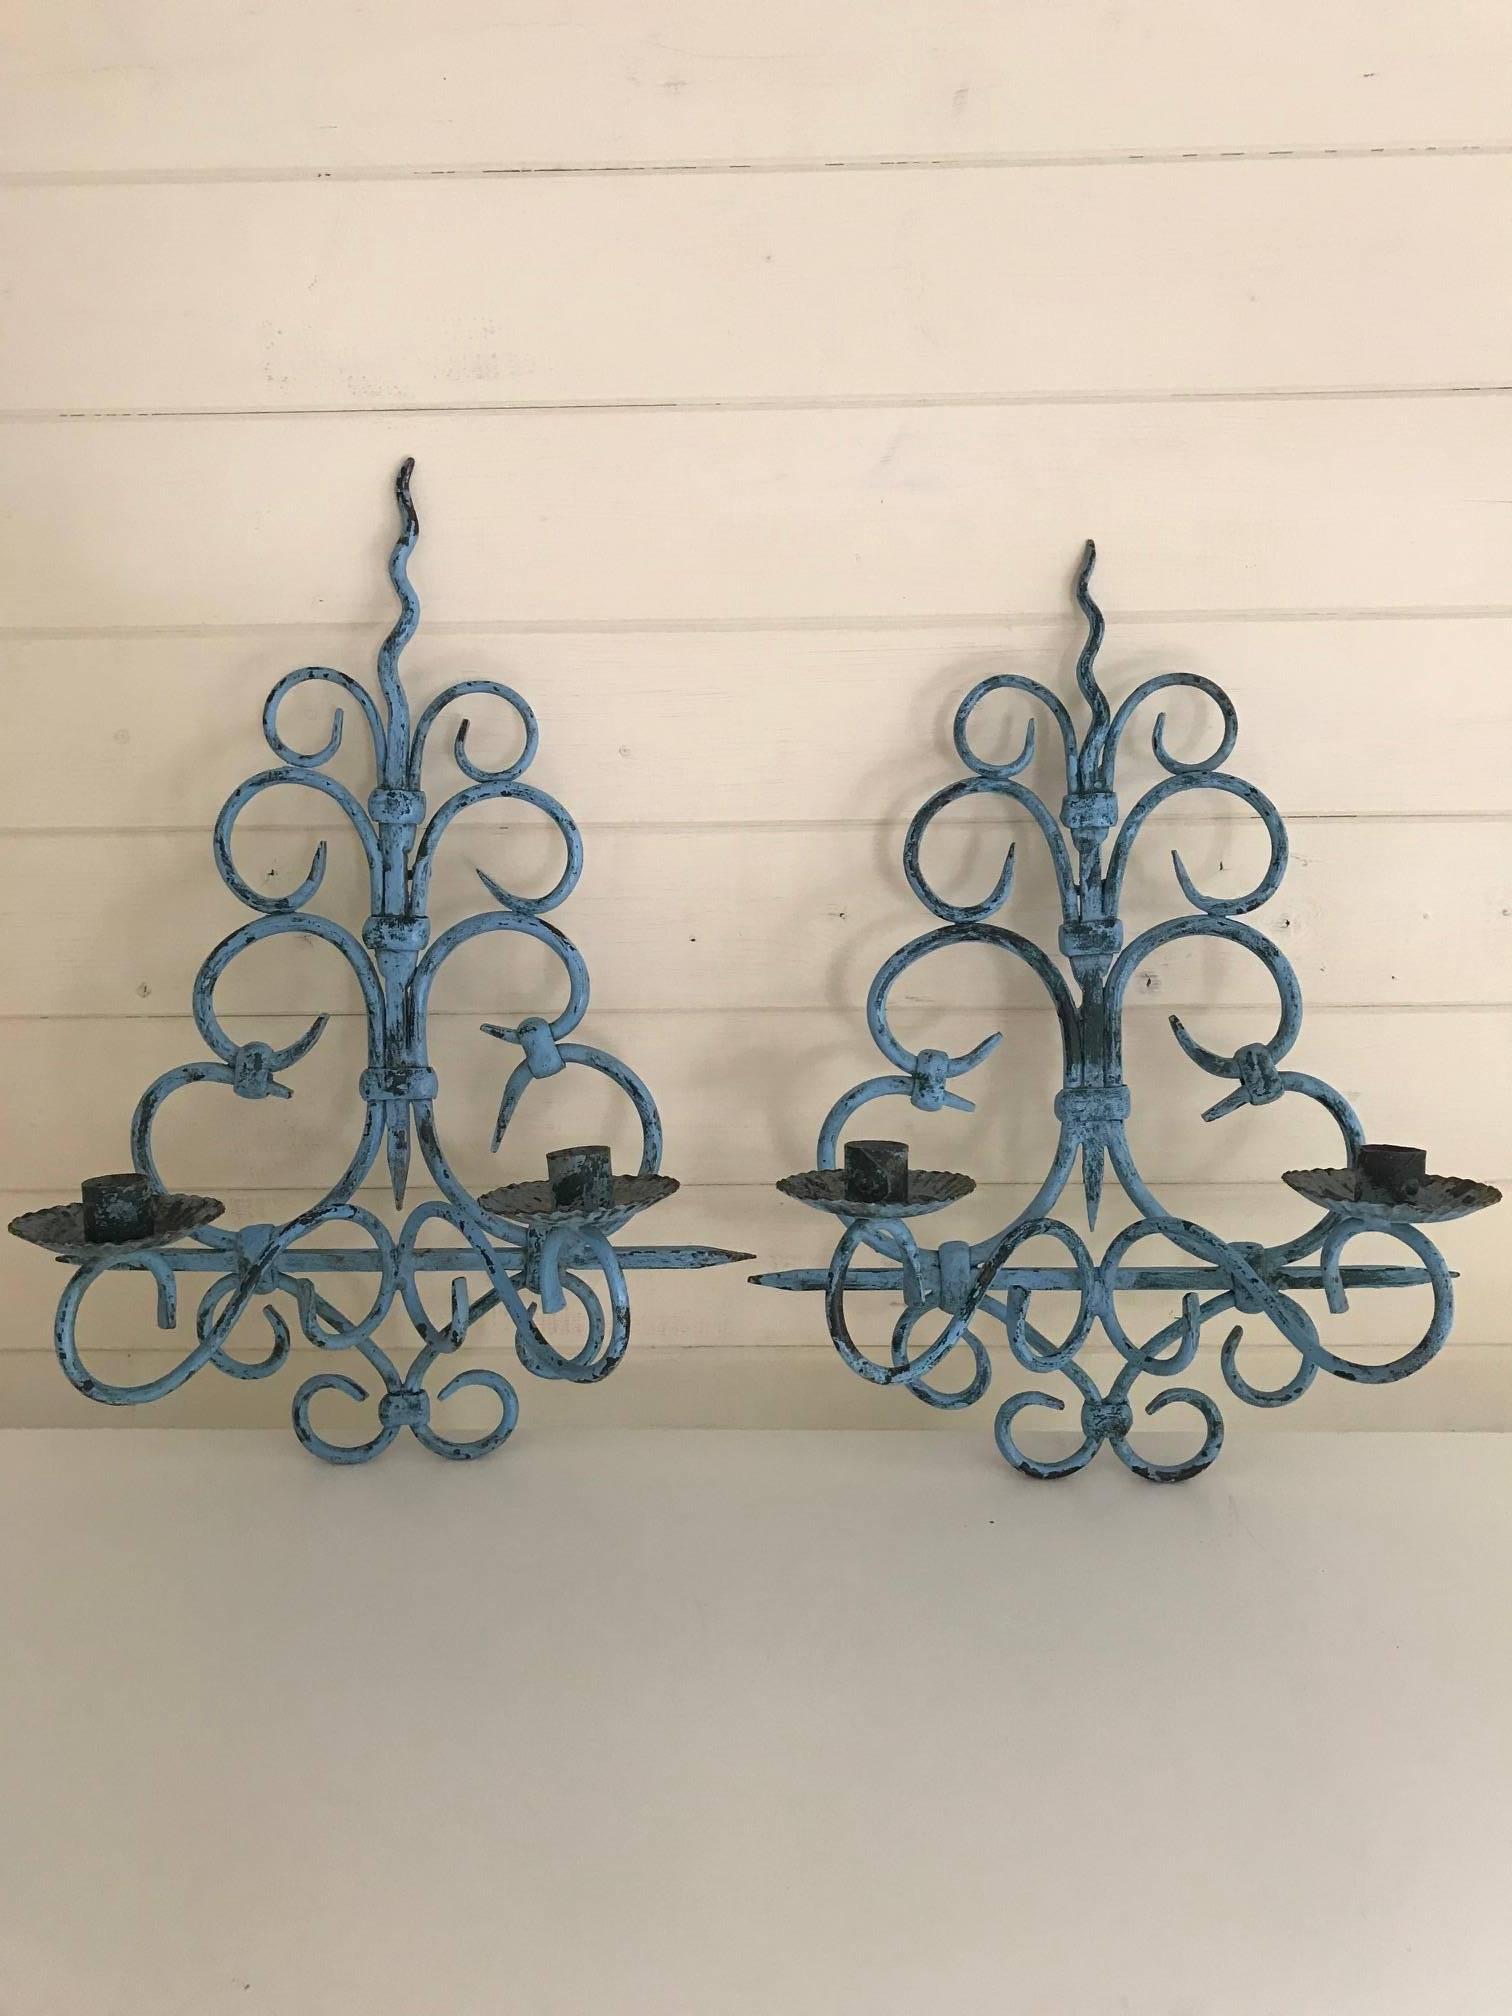 A matched pair of French solid wrought painted iron wall light sconces. Traces of green and blue paint showing. Can be used currently with candles or rewired to be used with electrical fittlings. One of the lights is slightly taller than the other.